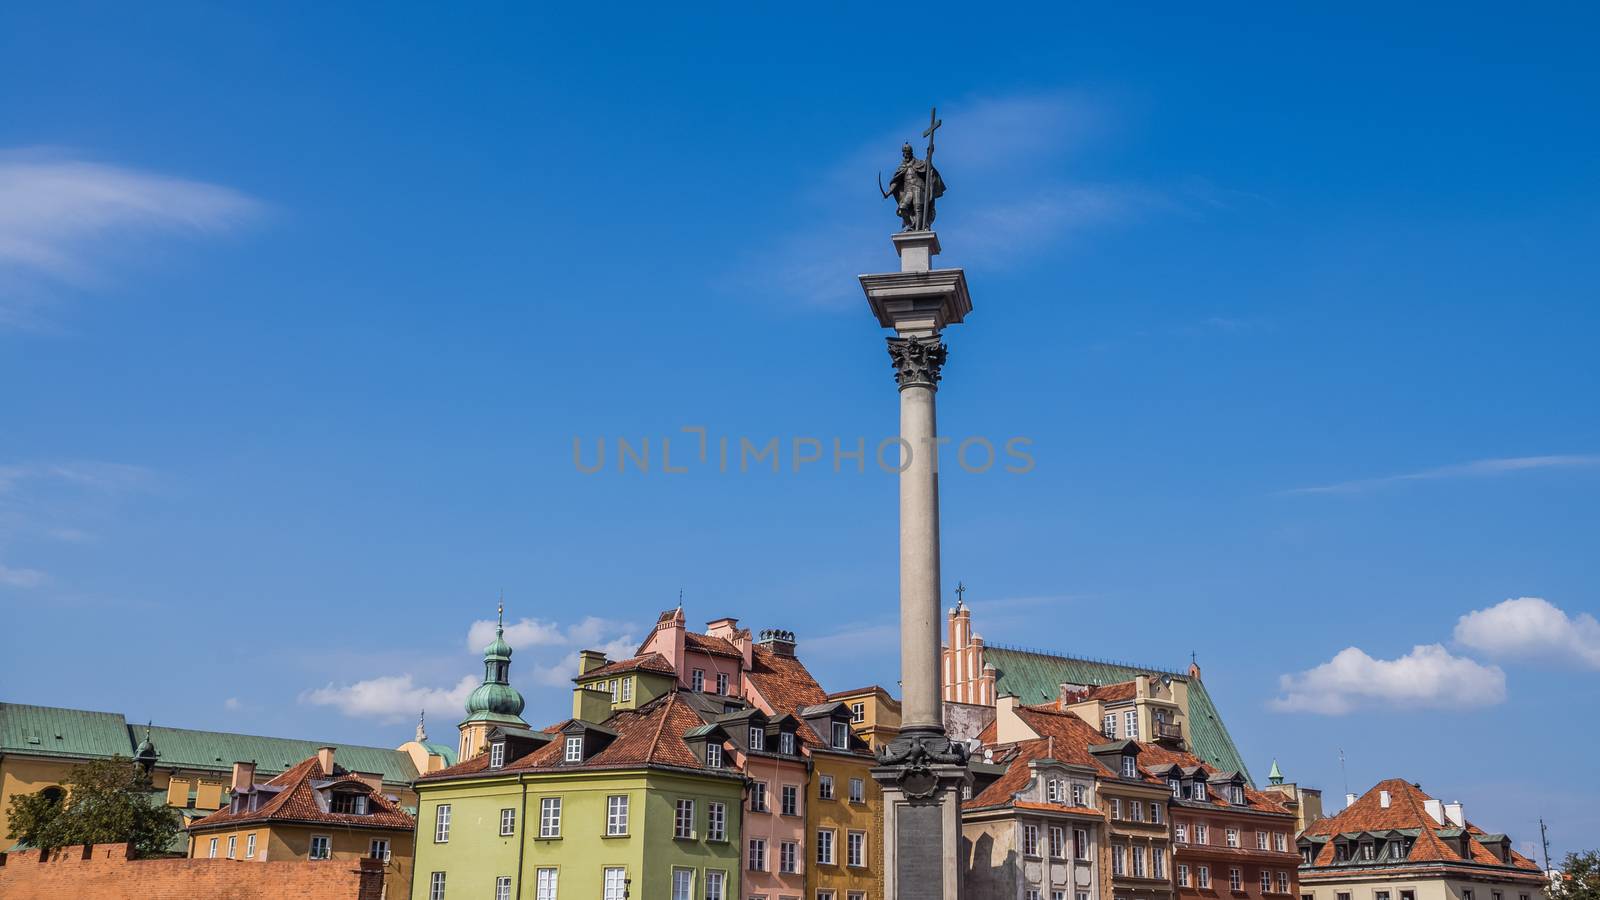 Castle Square in Warsaw, Poland with Old Town skyline and King Sigismund's Column.